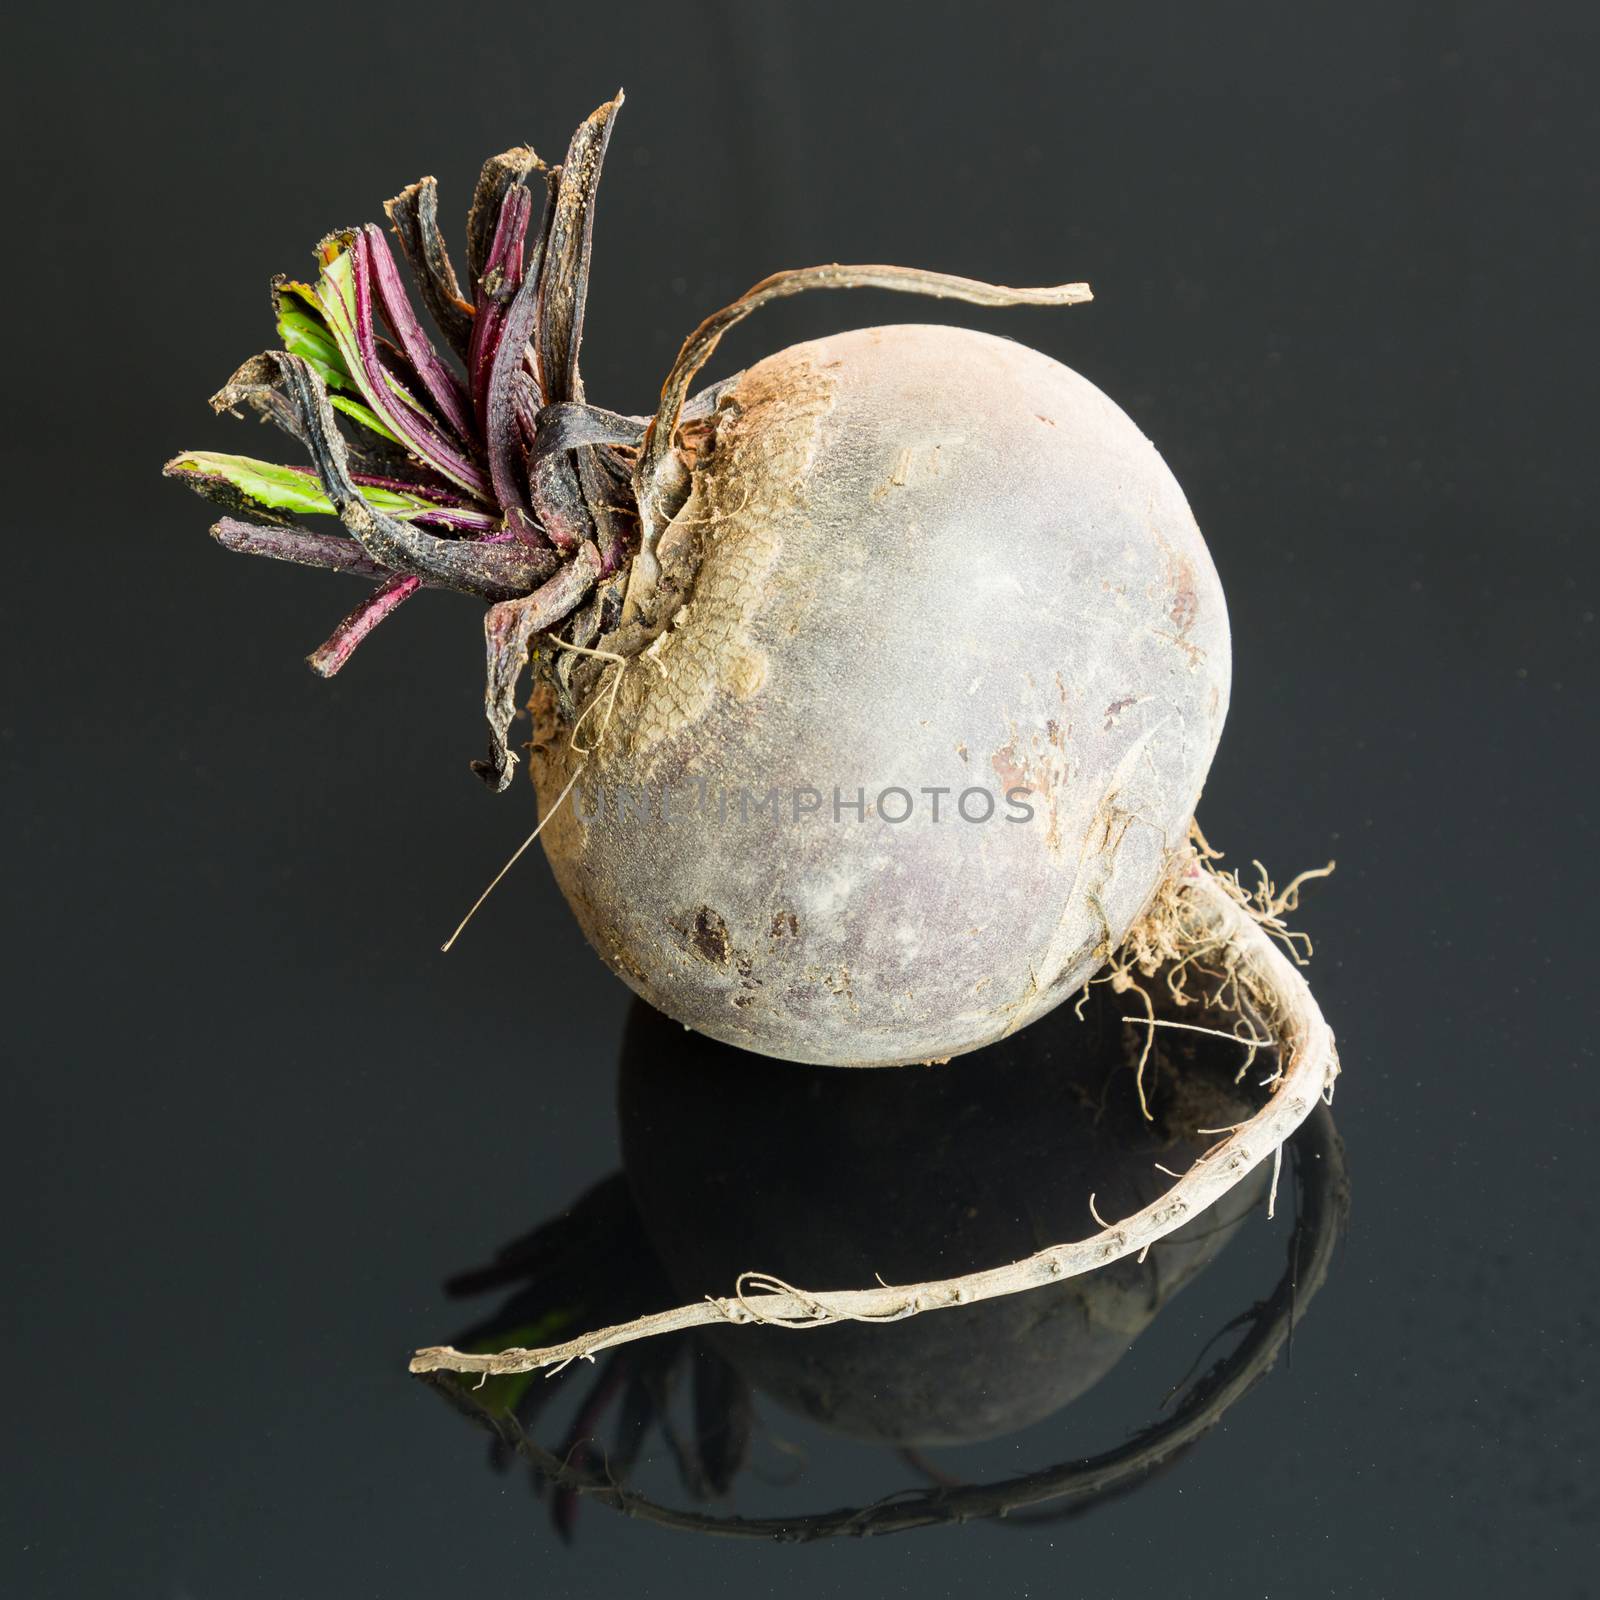 Three farm fresh whole raw beetroot in a close up view on a black surface in a healthy diet or vegetarian concept